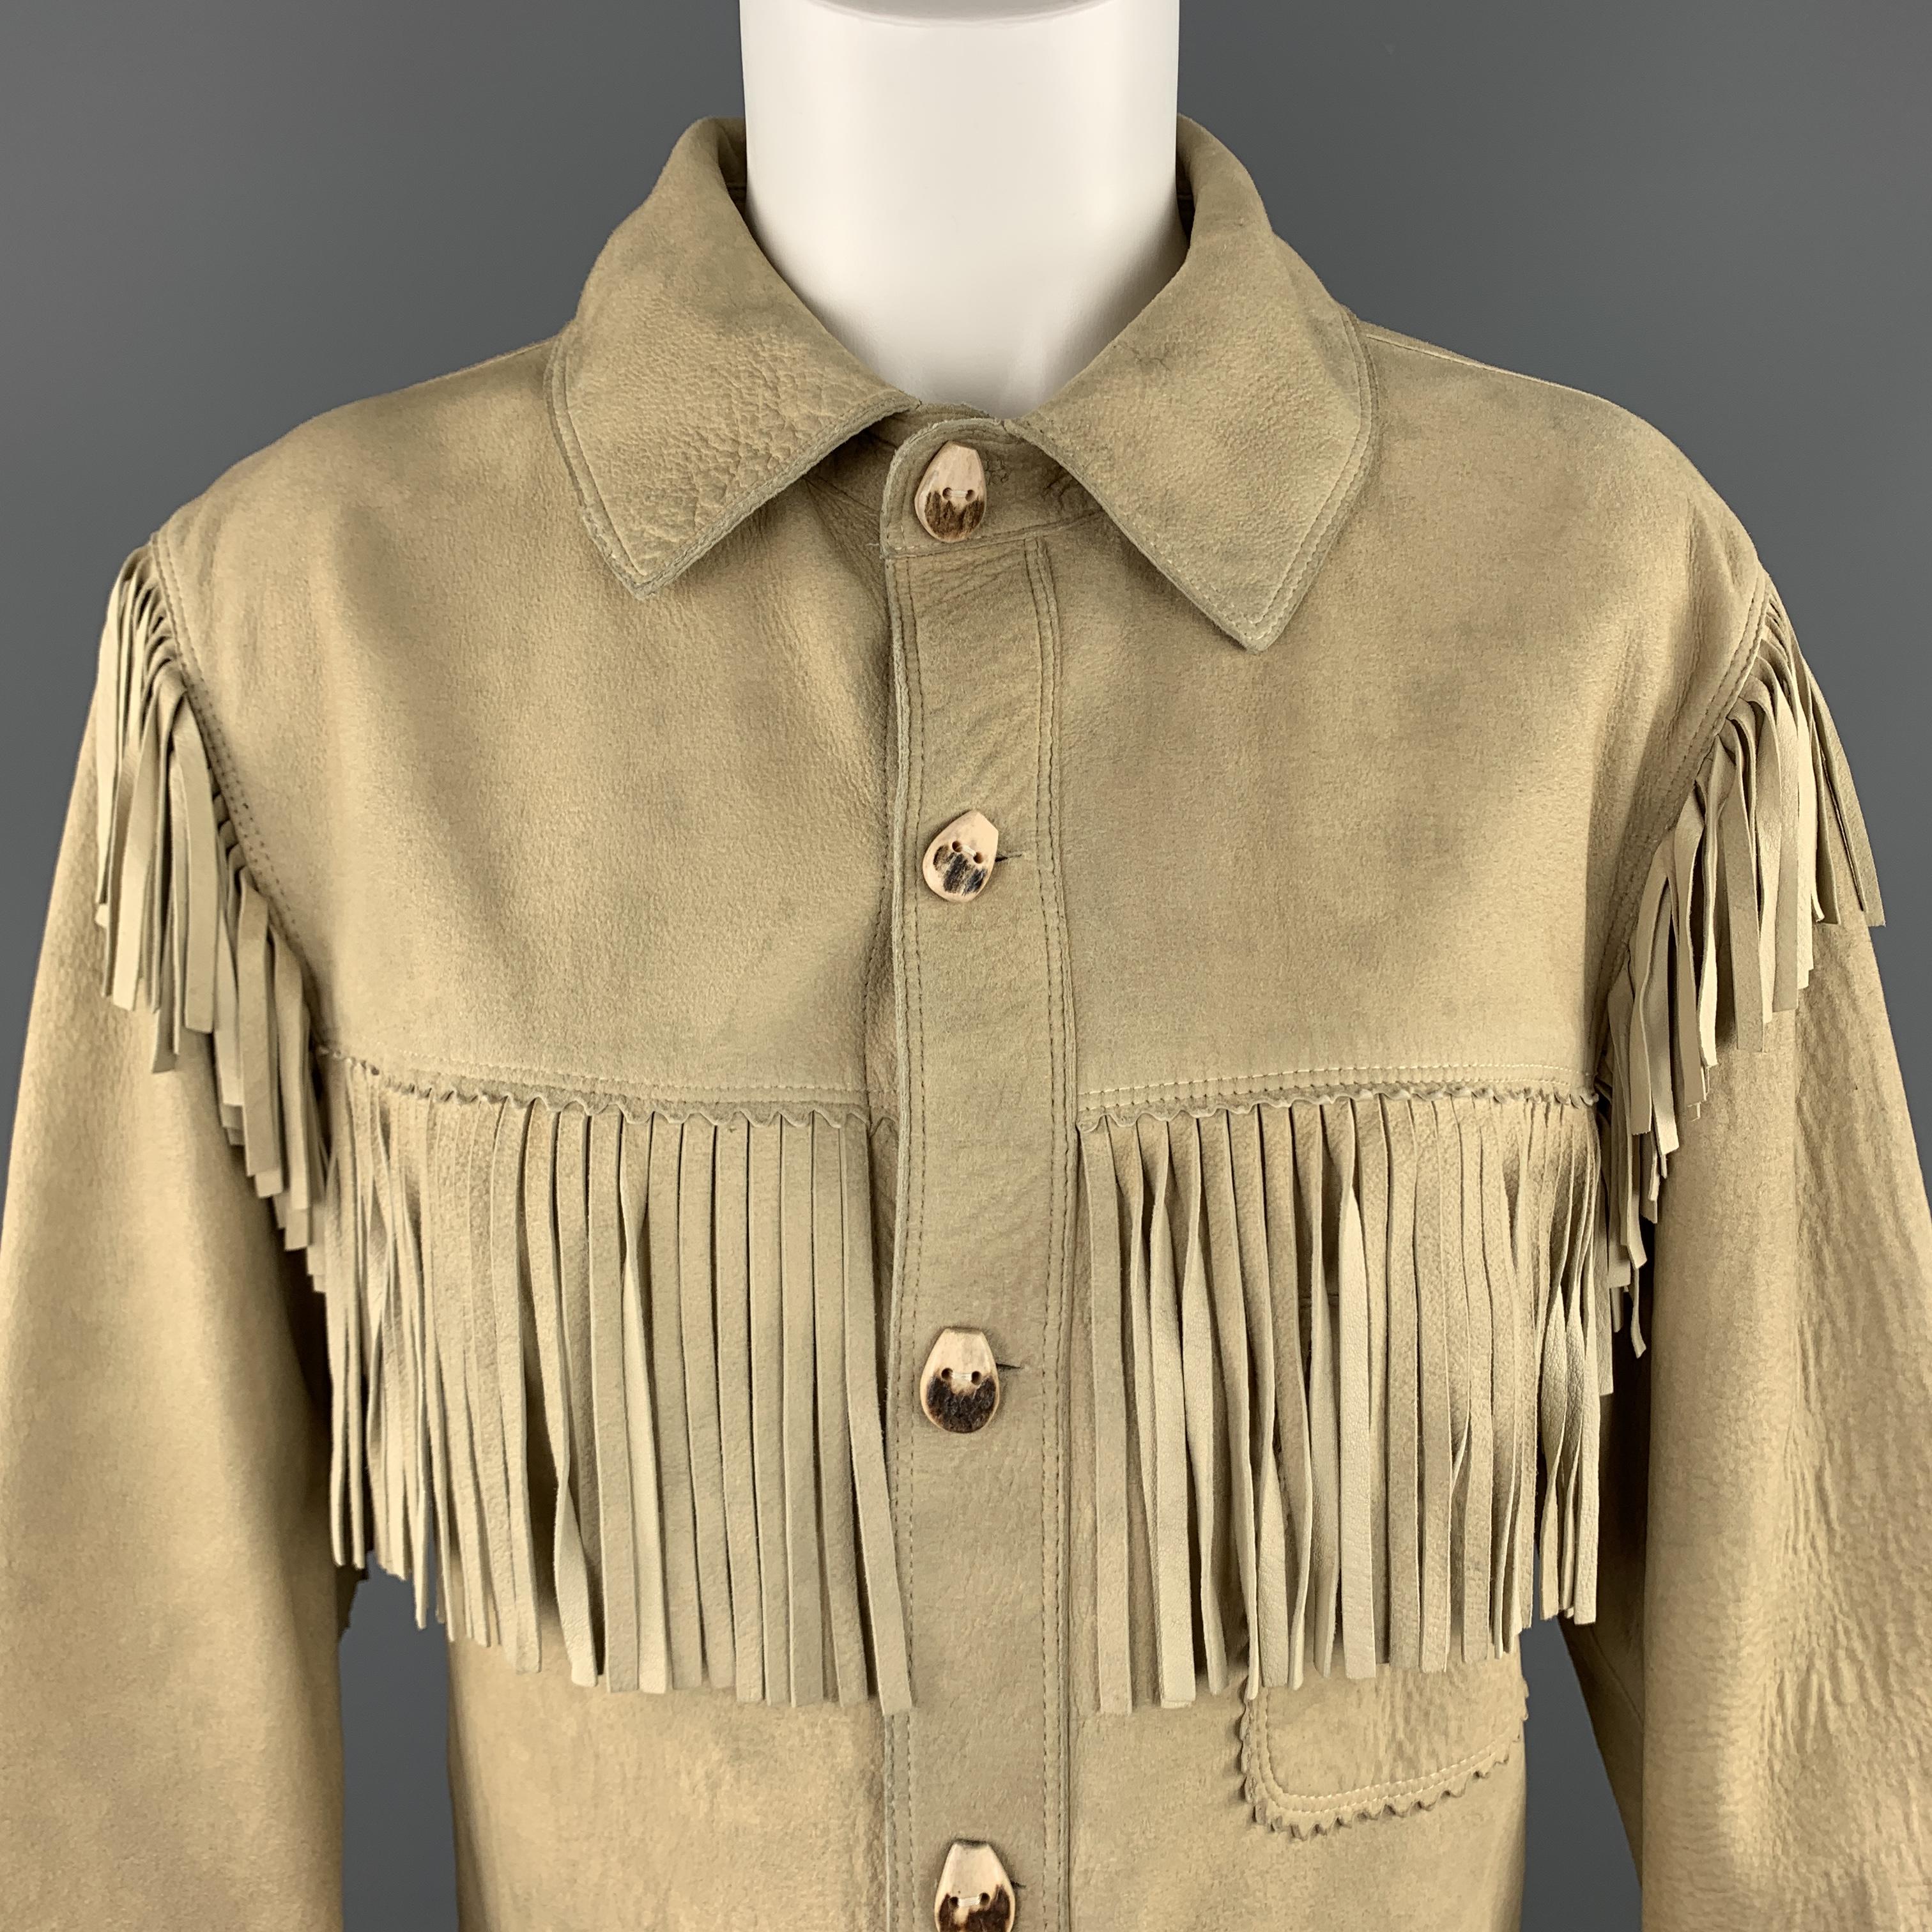 RALPH LAUREN PURPLE LABEL jacket comes in beige sueded lamb skin leather with a pointed collar, wood buttons, patch pockets, and fringe trim. natural aging throughout. As-is. Made in Italy.

Good Pre-Owned Condition.
Marked: